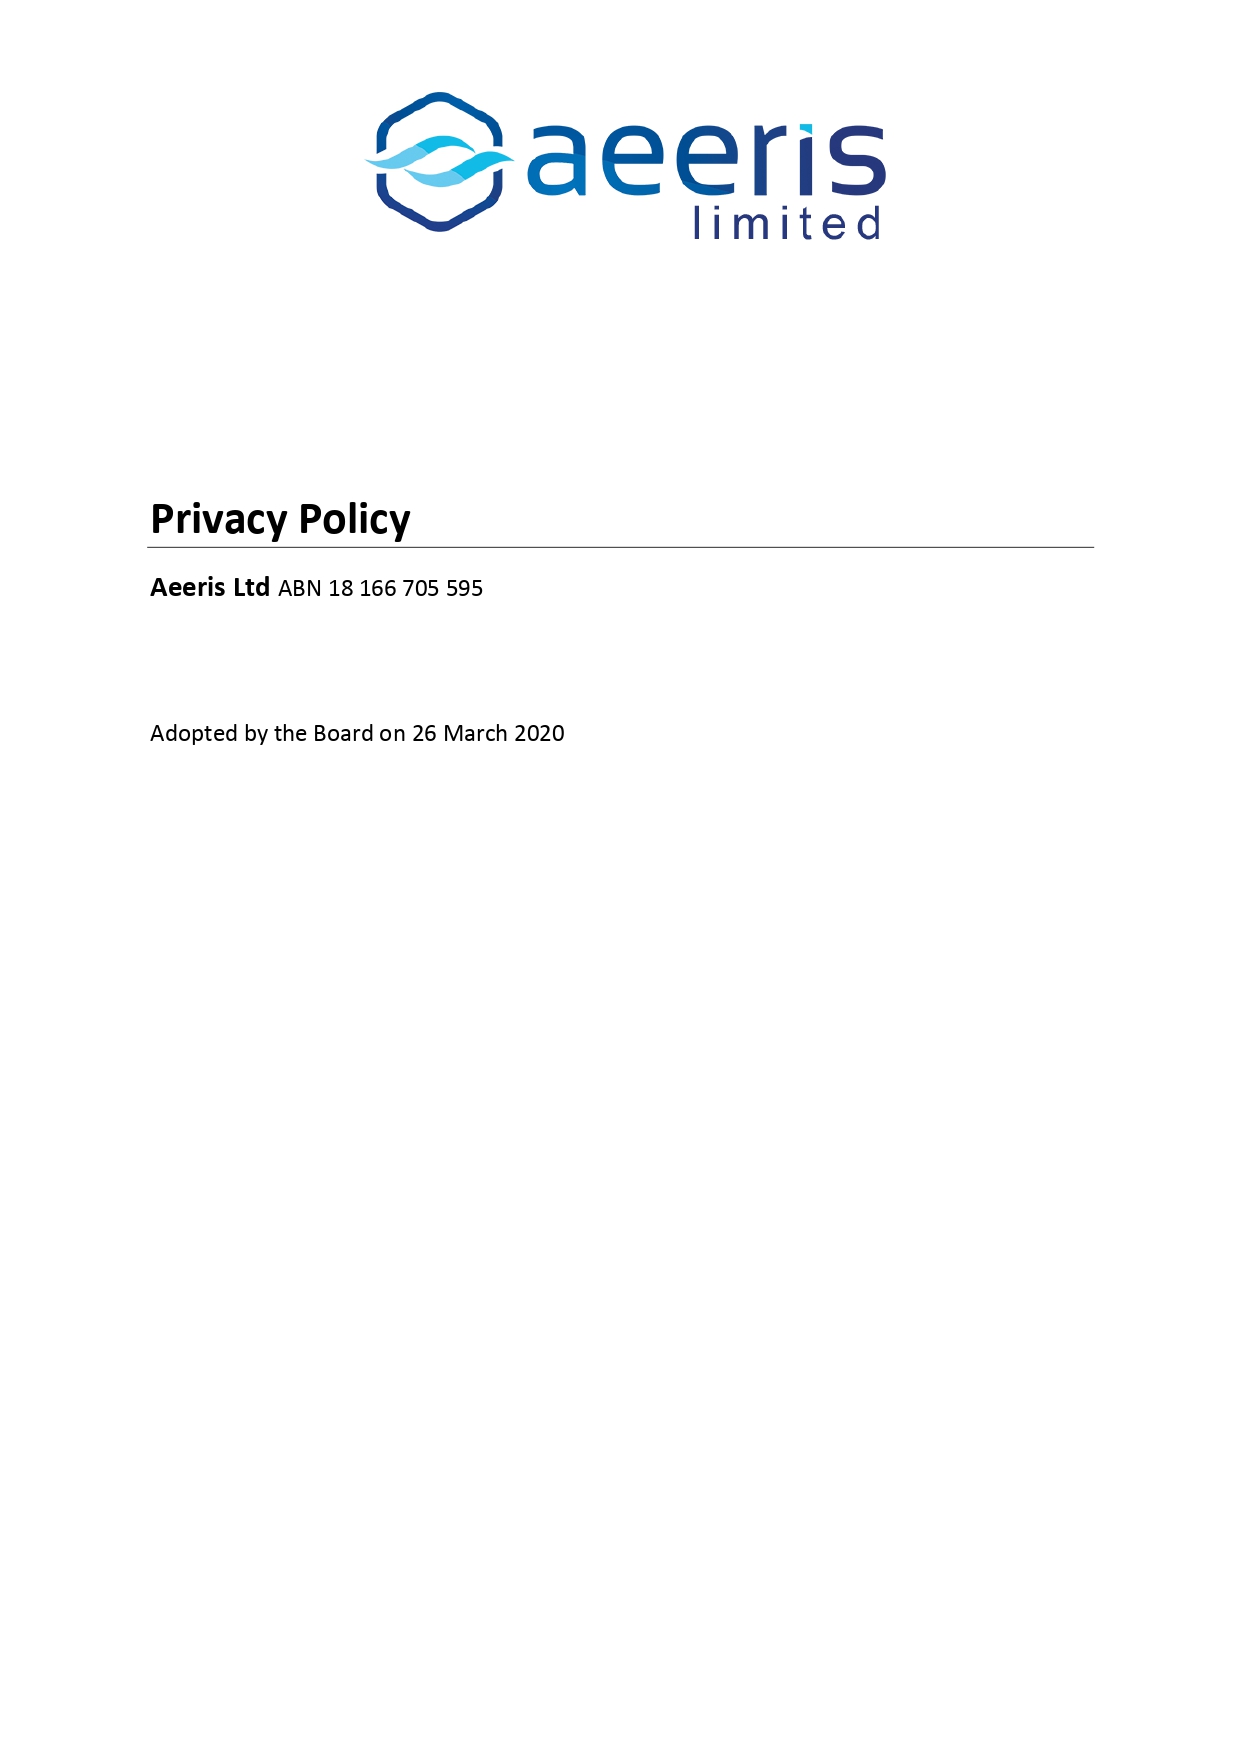 AER Privacy Policy